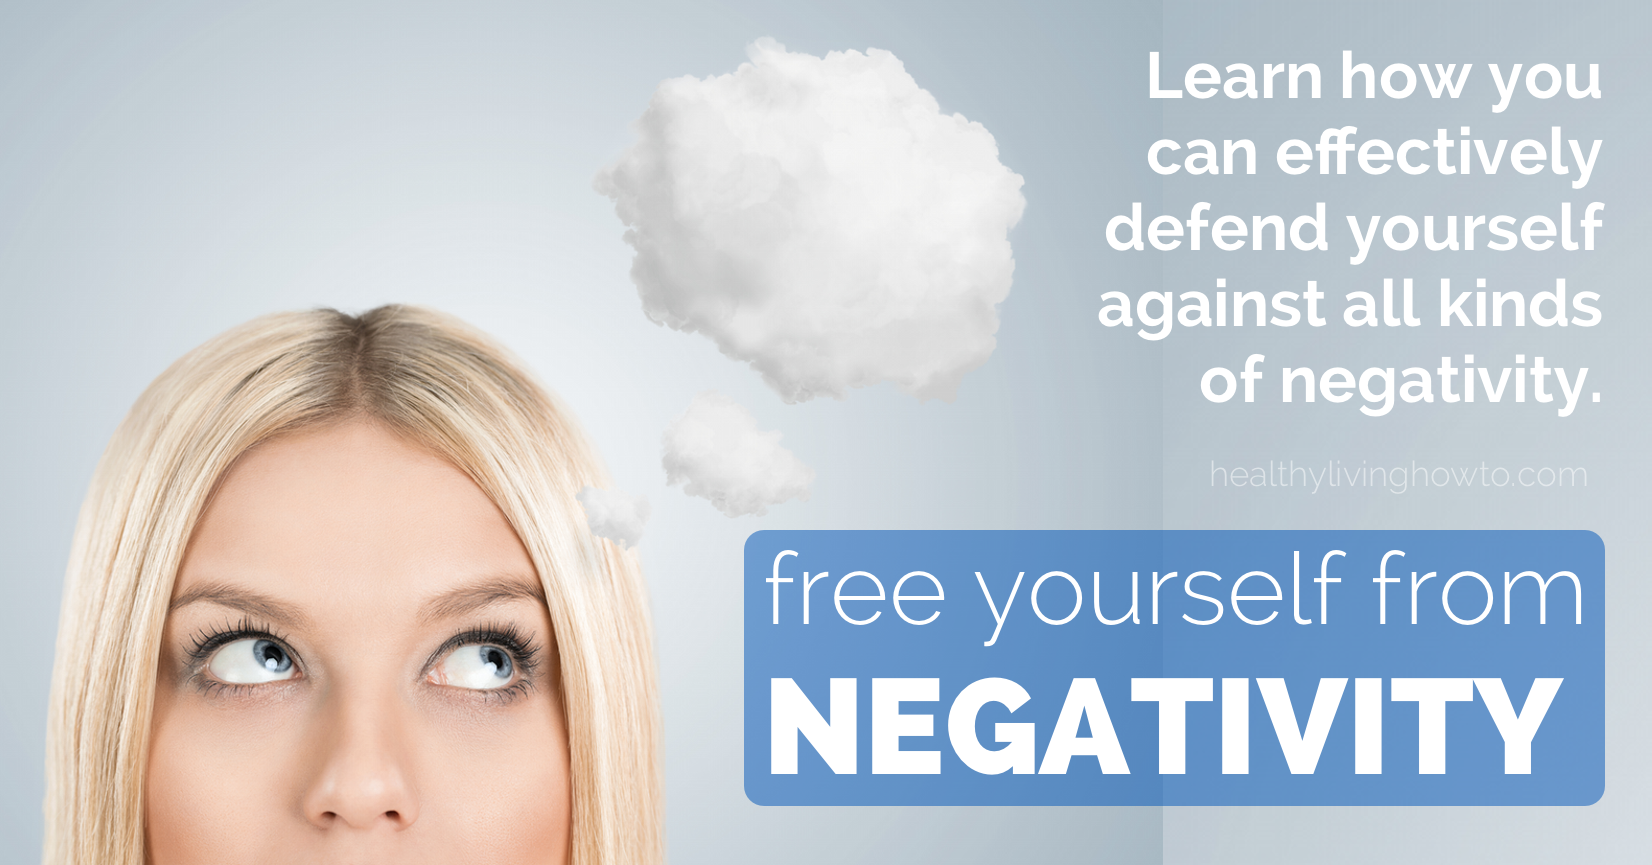 How To Free Yourself From Negativity | healthylivinghowto.com